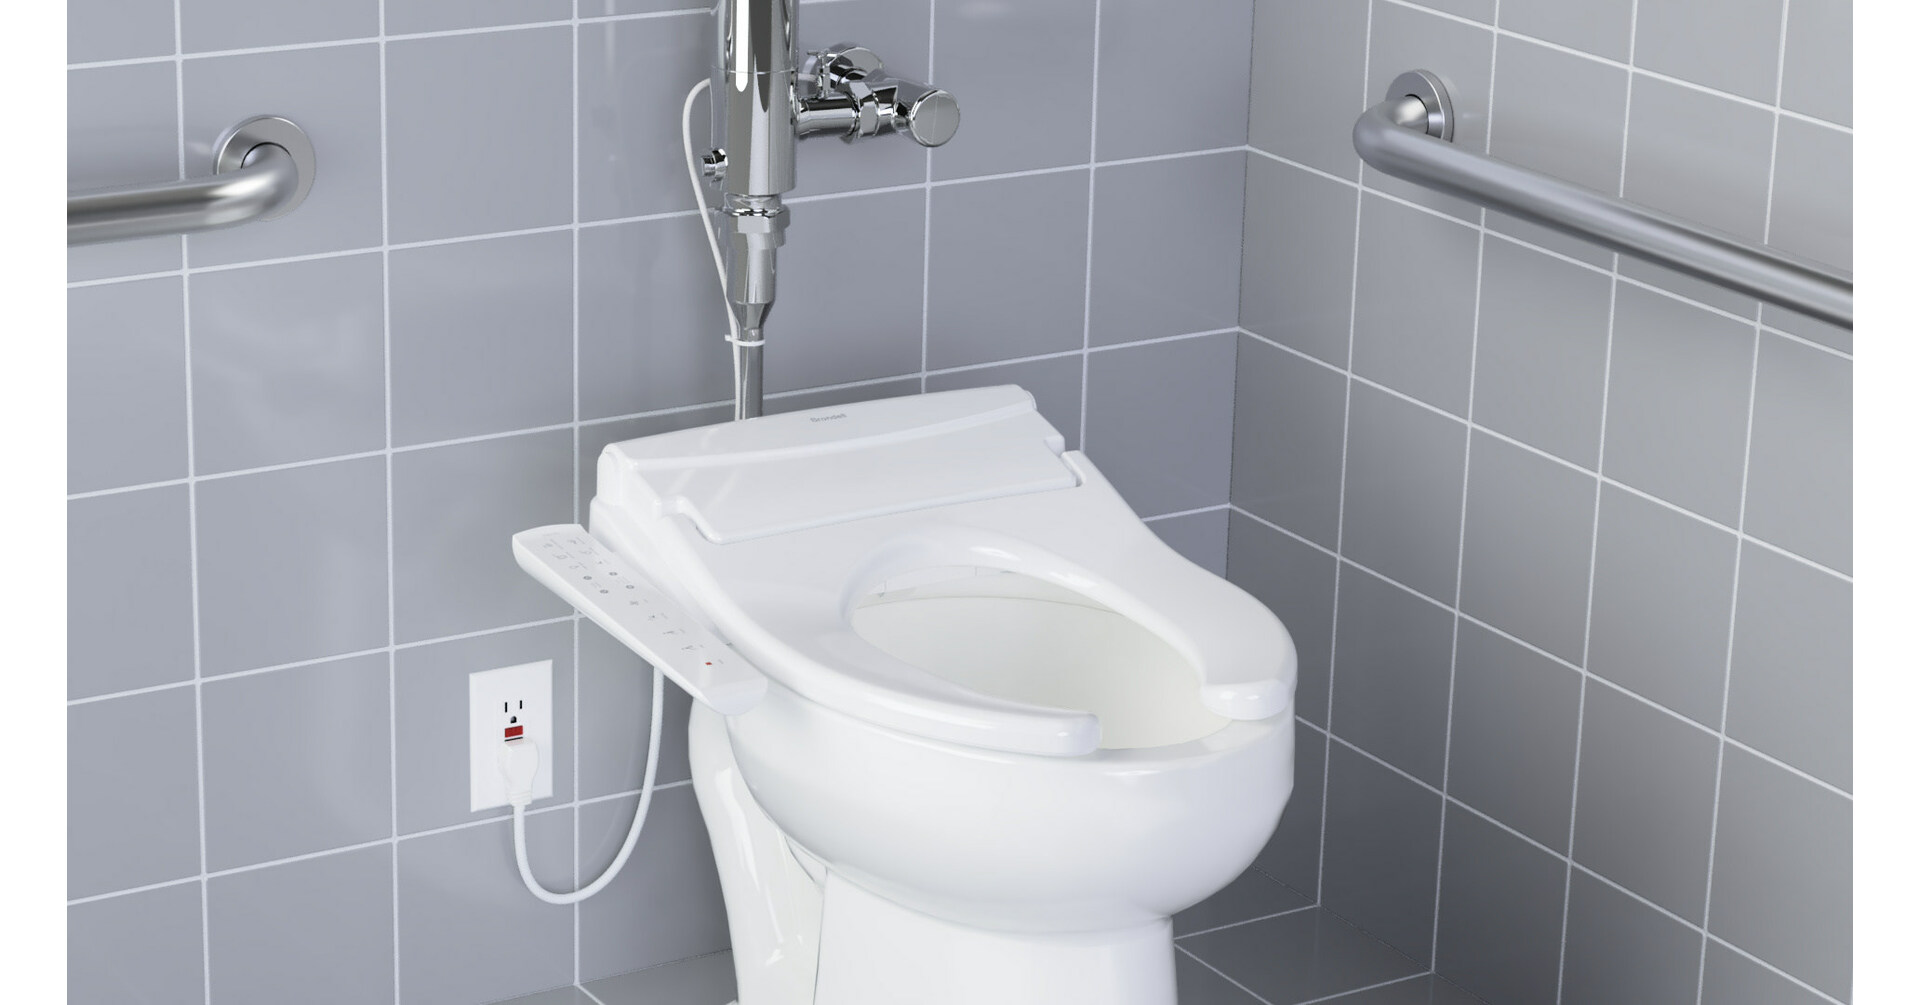 Brondell makes business more sustainable with the first-ever commercial bidet toilet seat